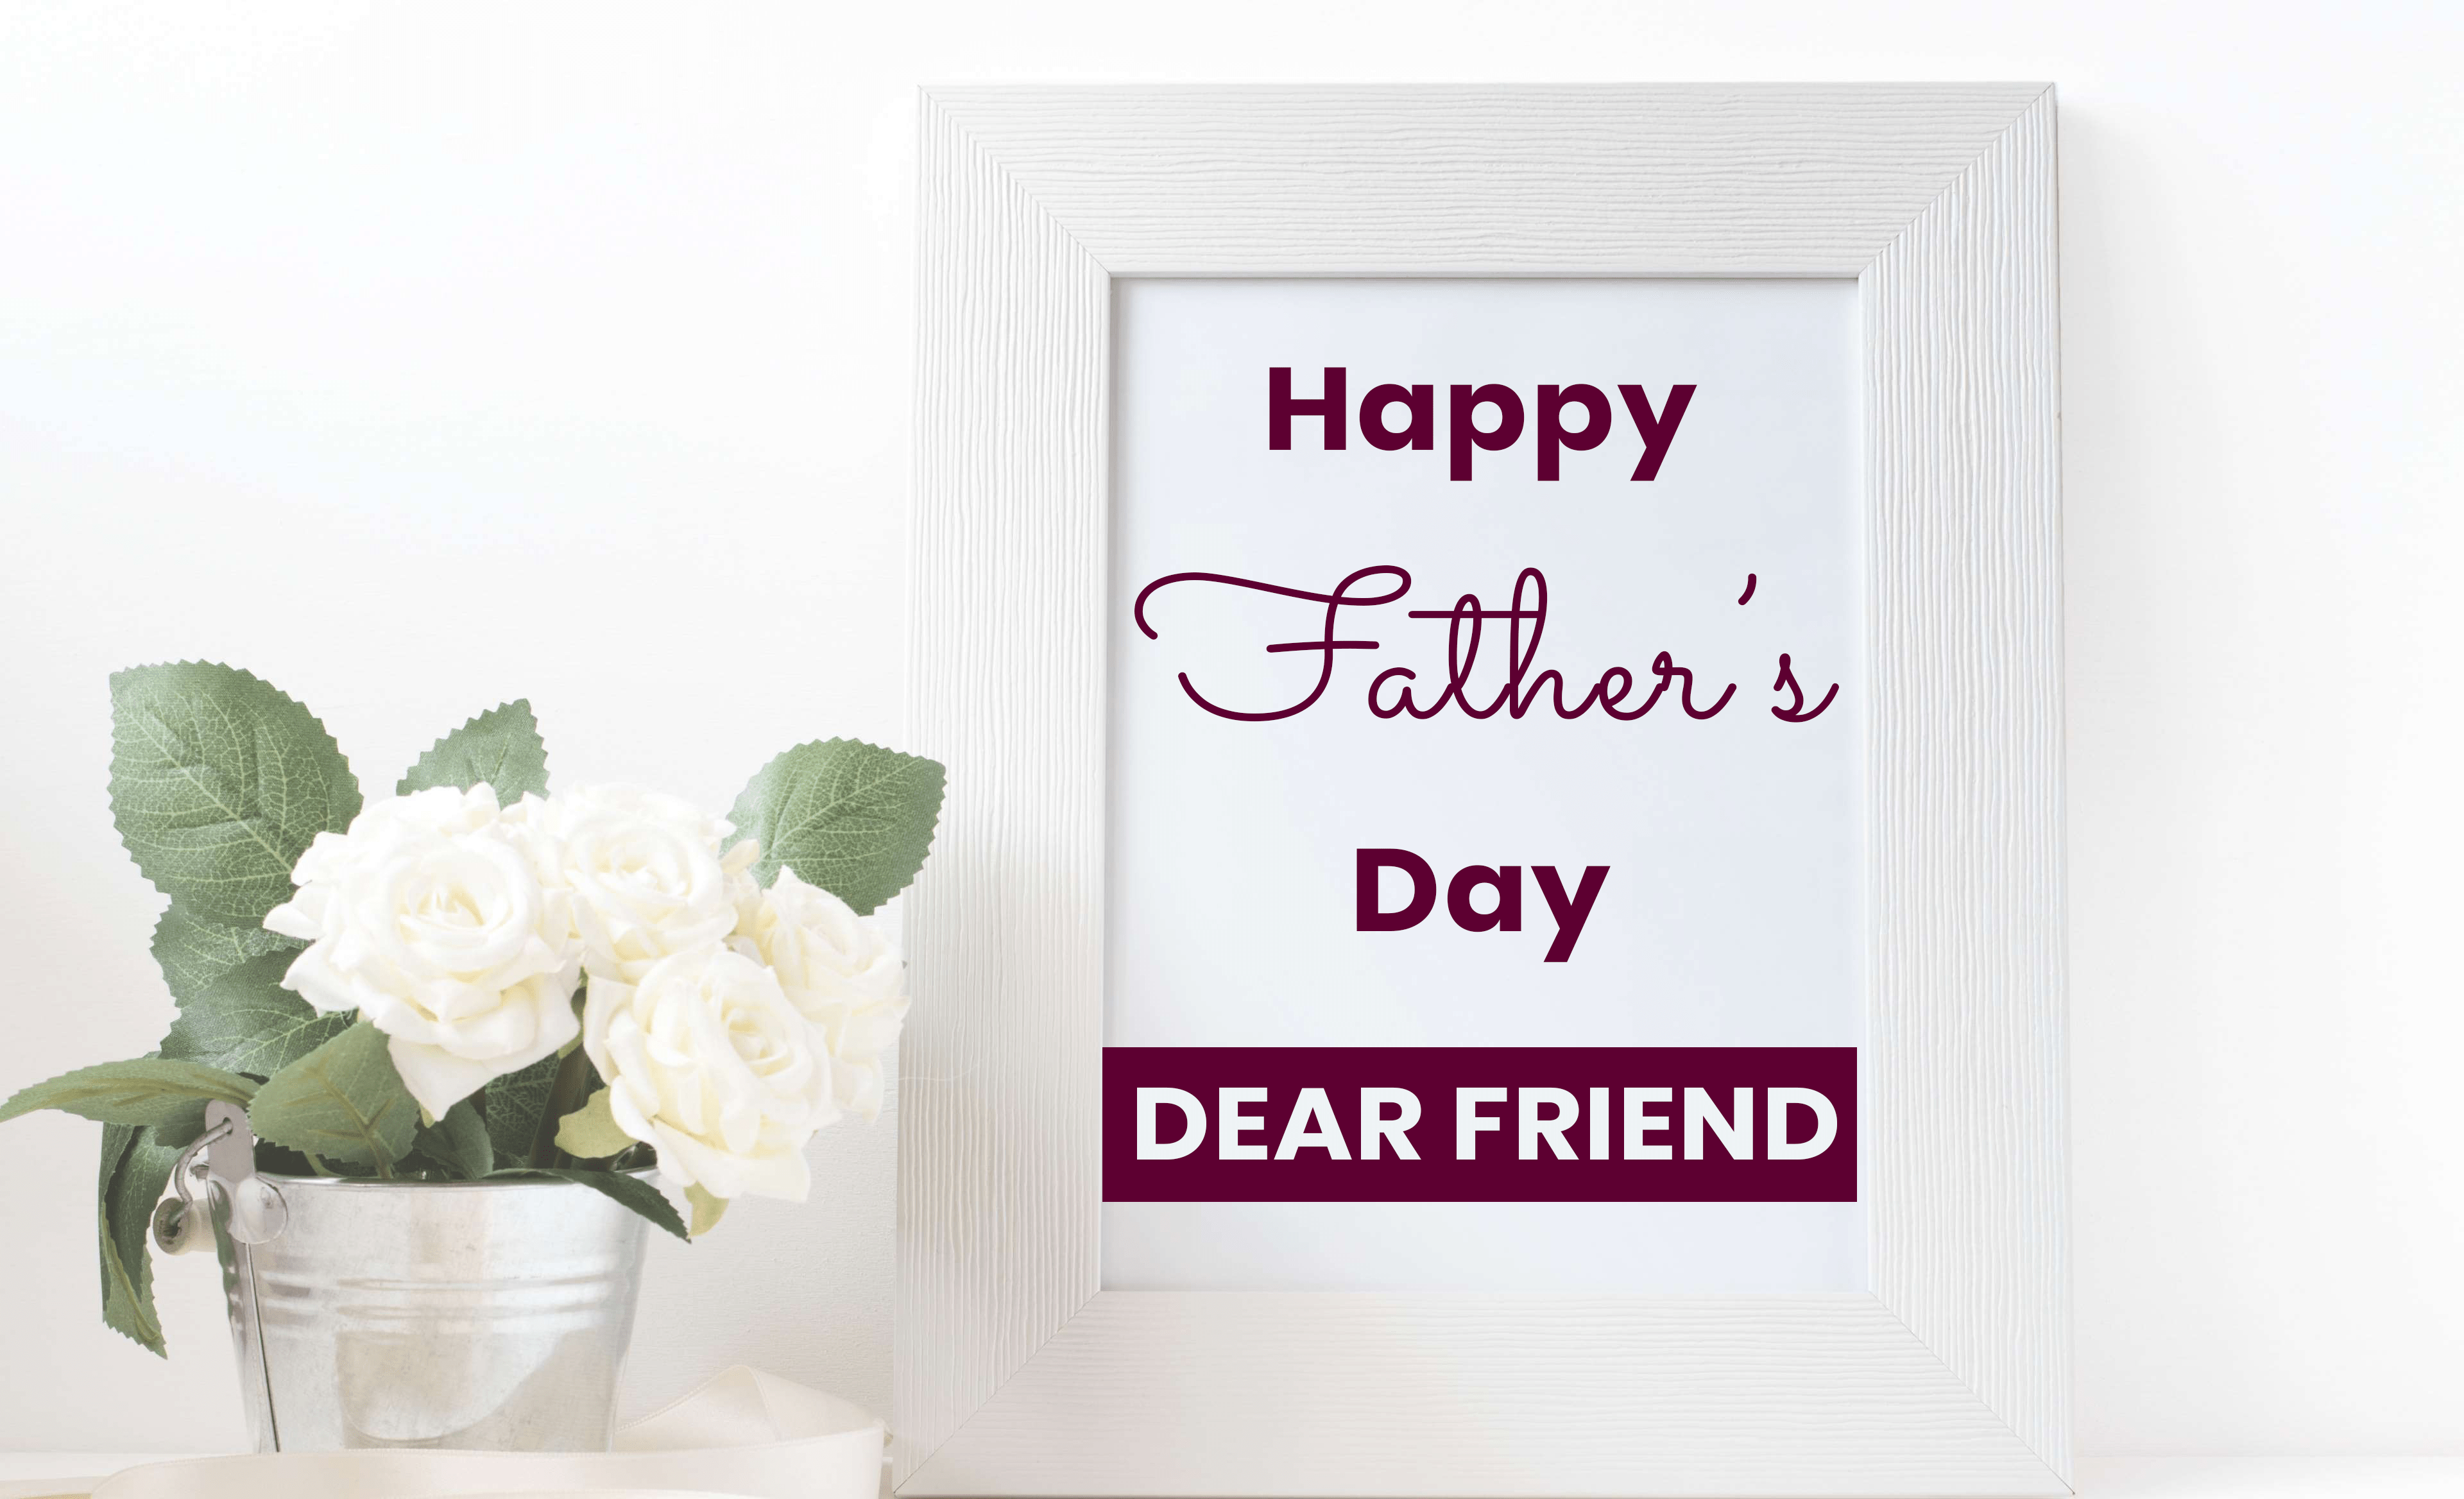 Happy Father's Day Wishes from Daughter